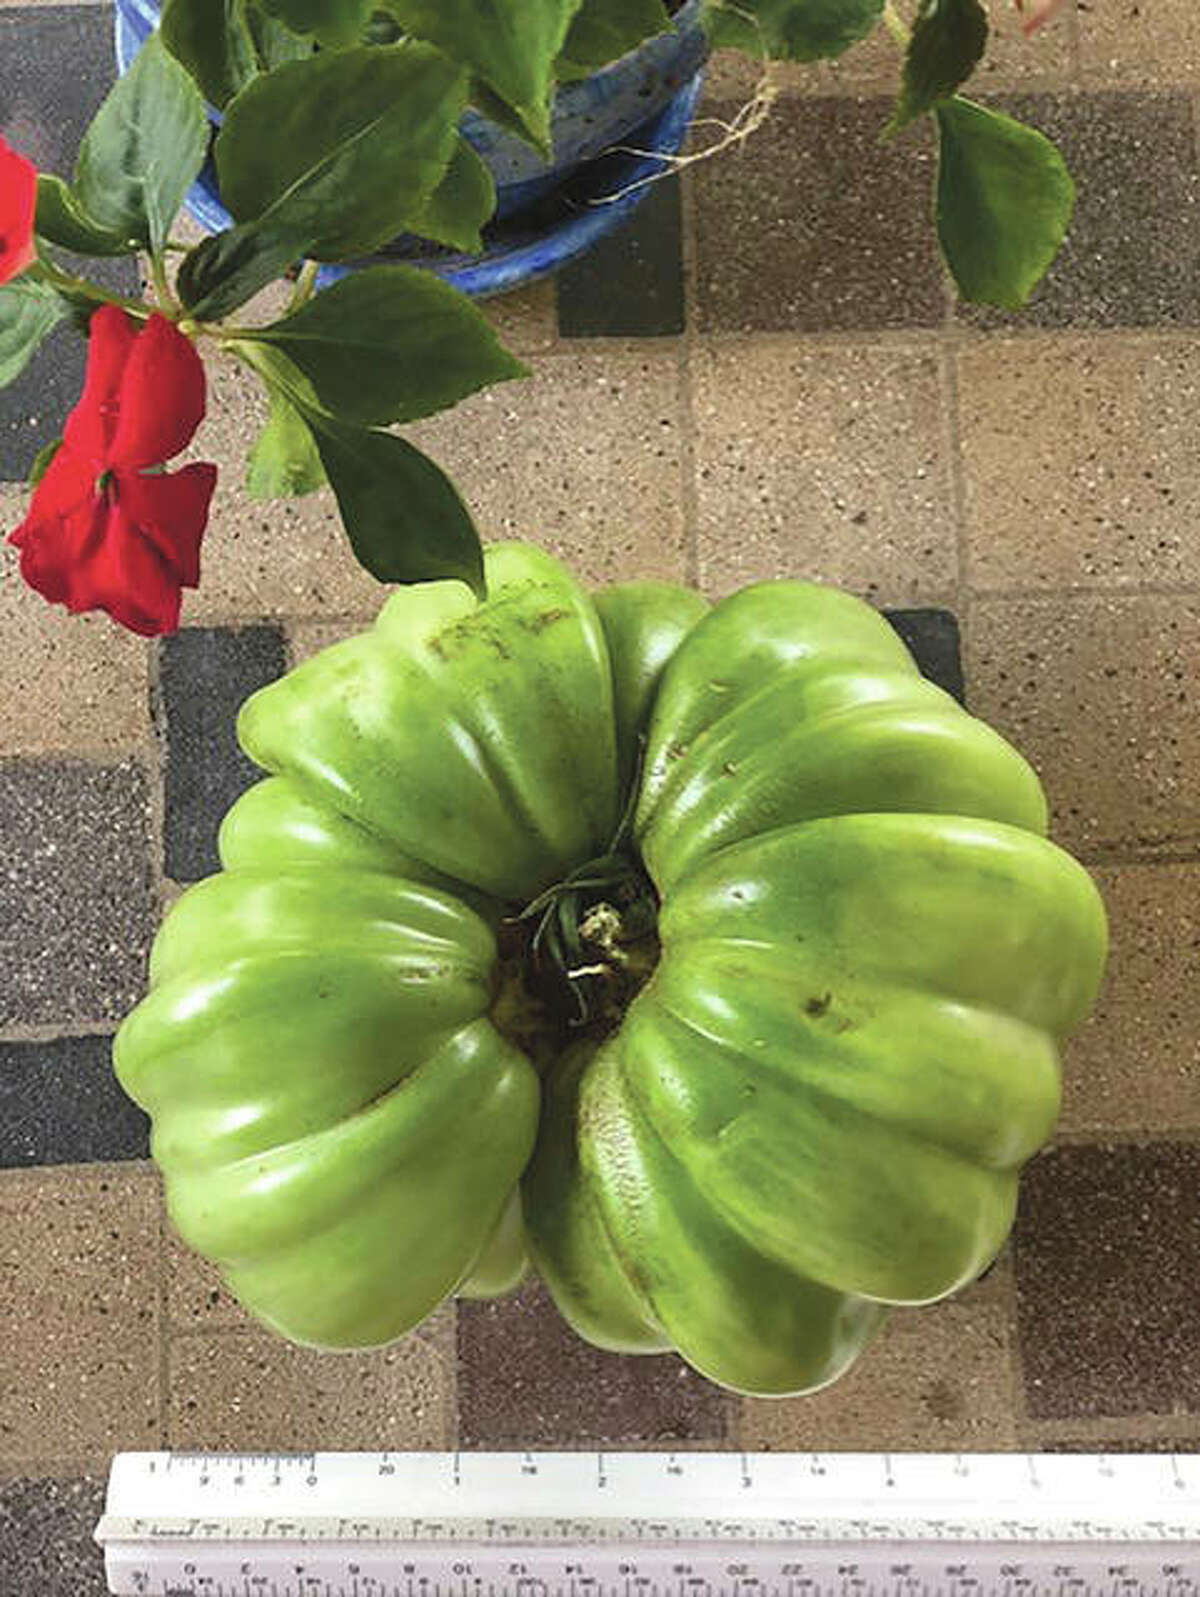 Reader Betty Oakes was surprised to see the size of this German queen tomato was a little more than 6 inches. Although it broke off of the branch while she was trying to lift it, she said she still plans to put it to use.